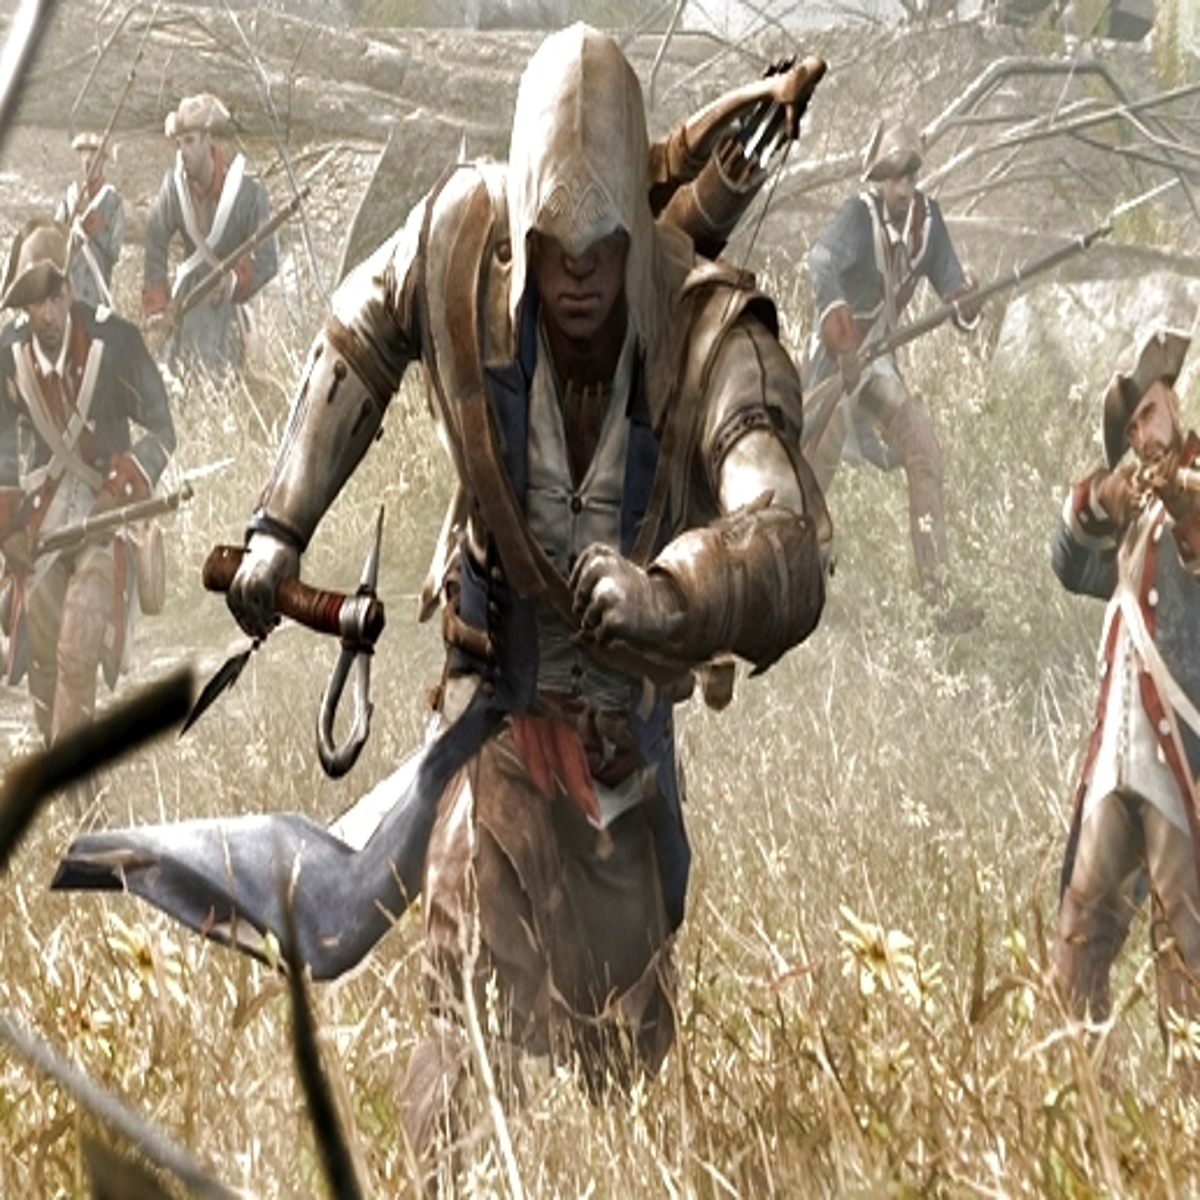 Assassins Creed 3 Steam Key - Instant Delivery